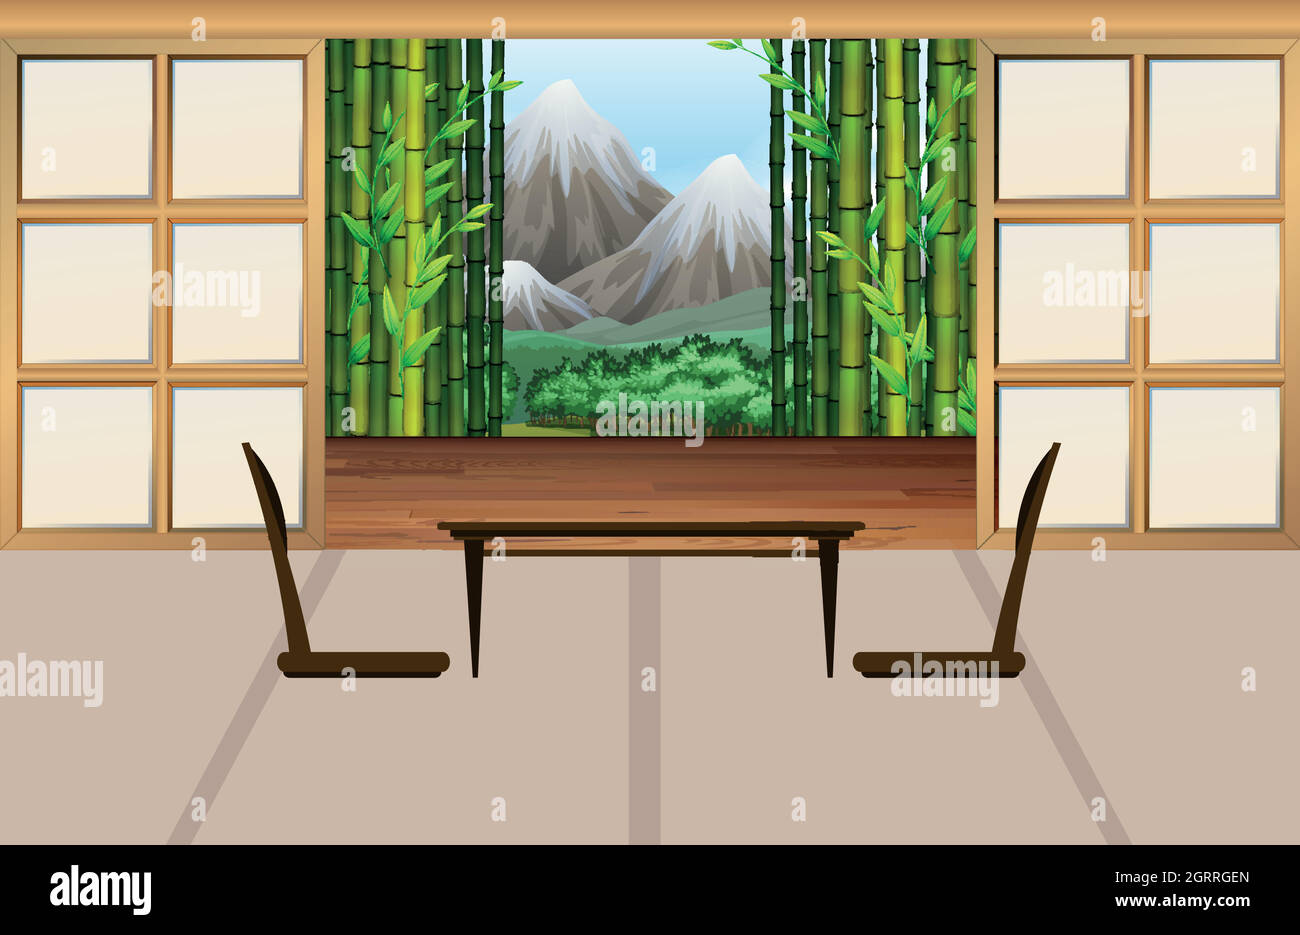 Living room in japanese style Stock Vector